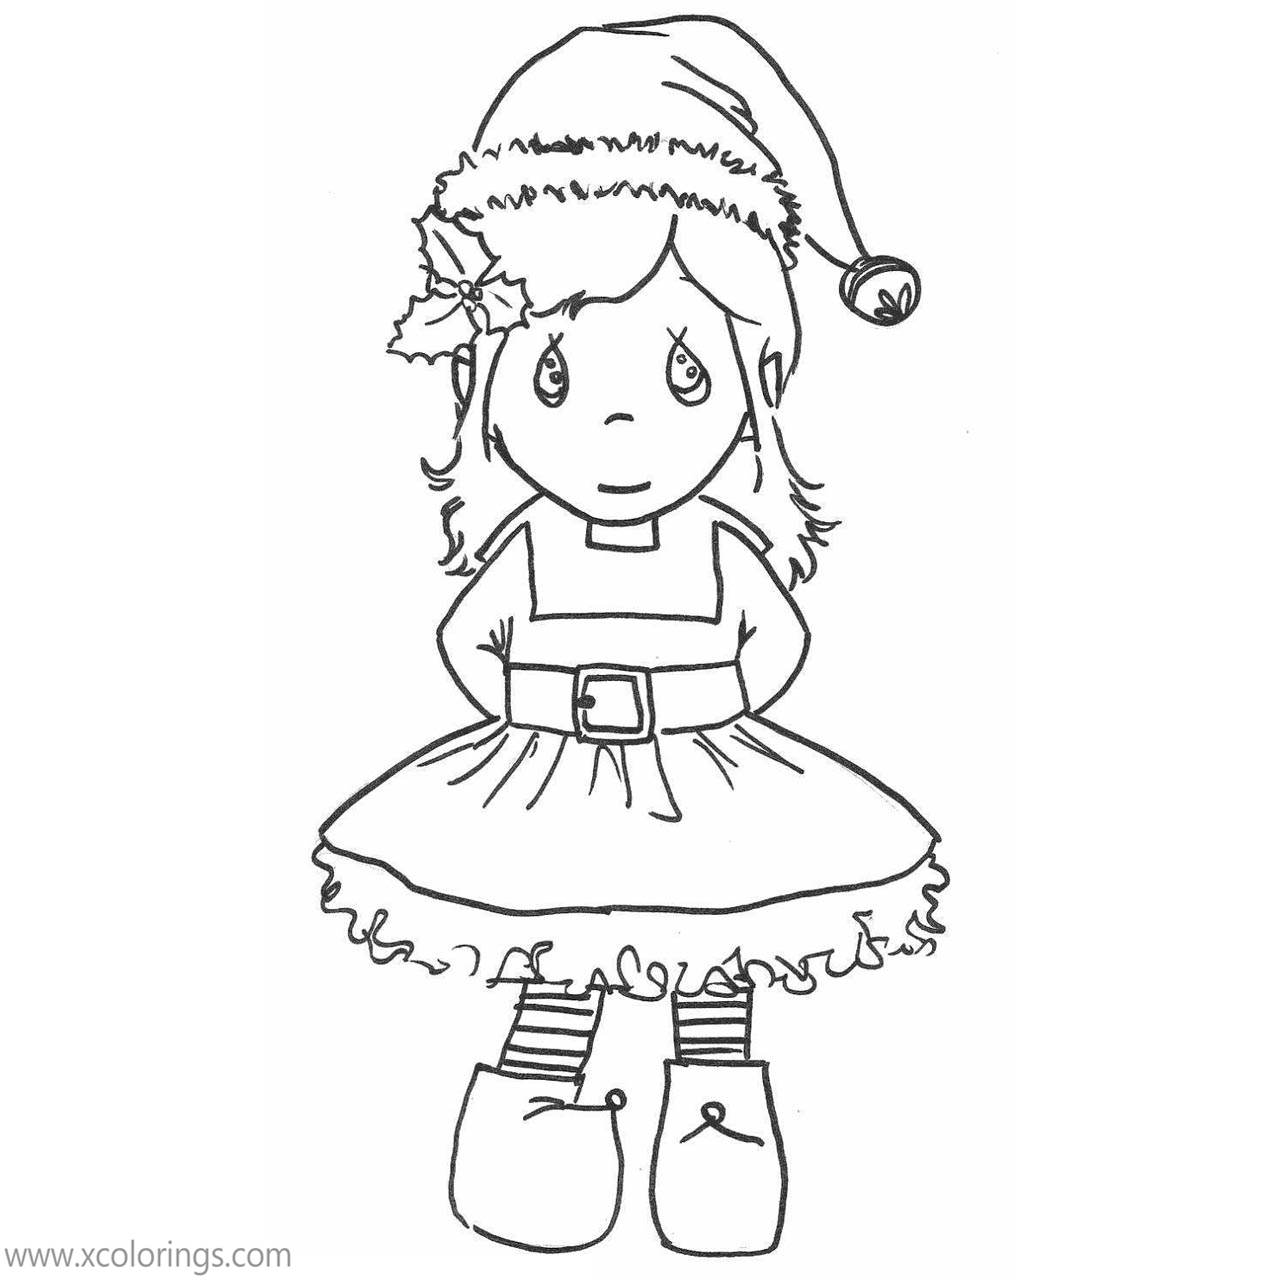 Free Elf On The Shelf Coloring Pages Elfin Girl in Santa Hat printable